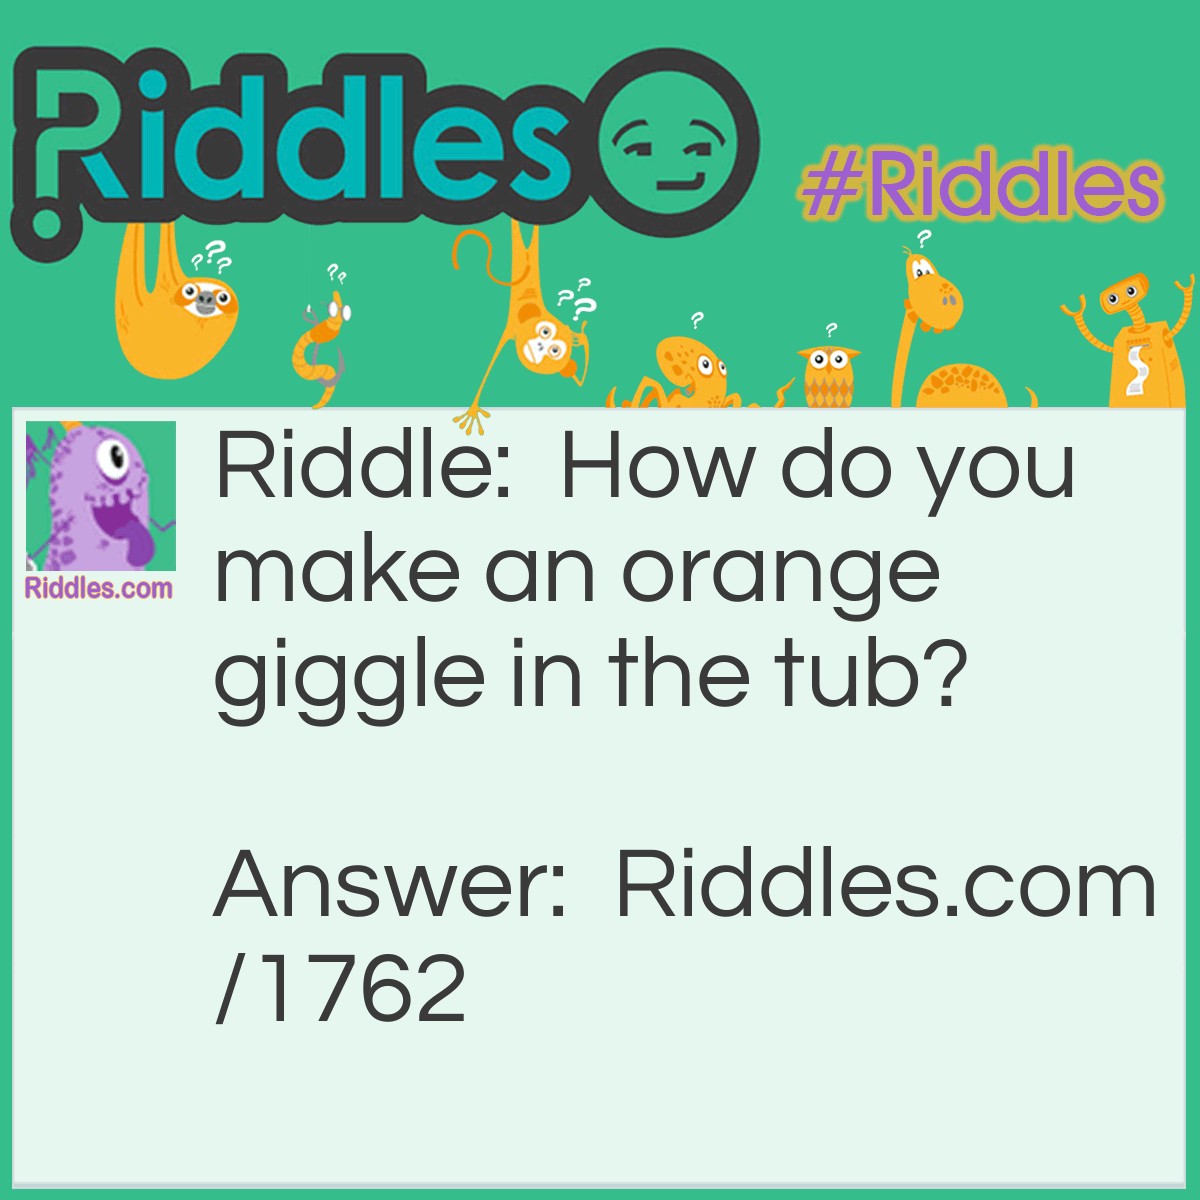 Riddle: How do you make an orange giggle in the tub? Answer: Tickle its navel.